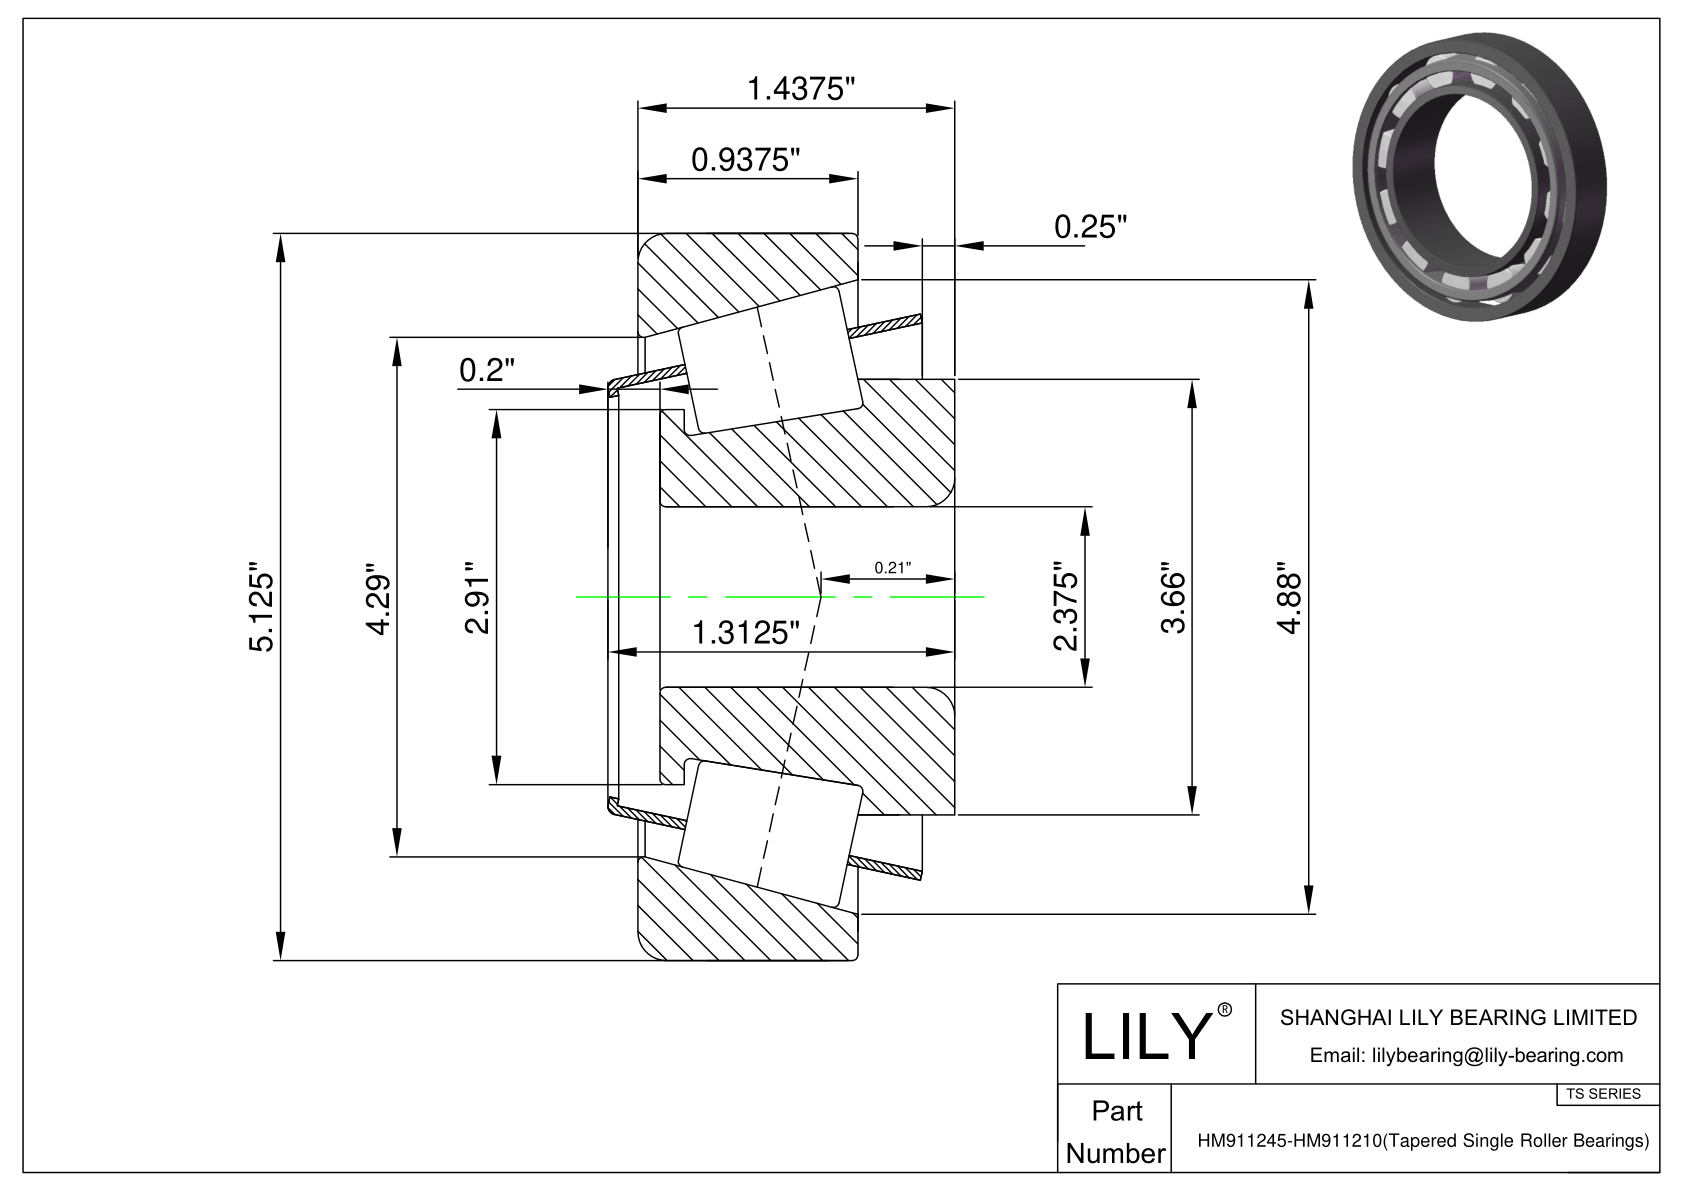 HM911245-HM911210 TS (Tapered Single Roller Bearings) (Imperial) cad drawing